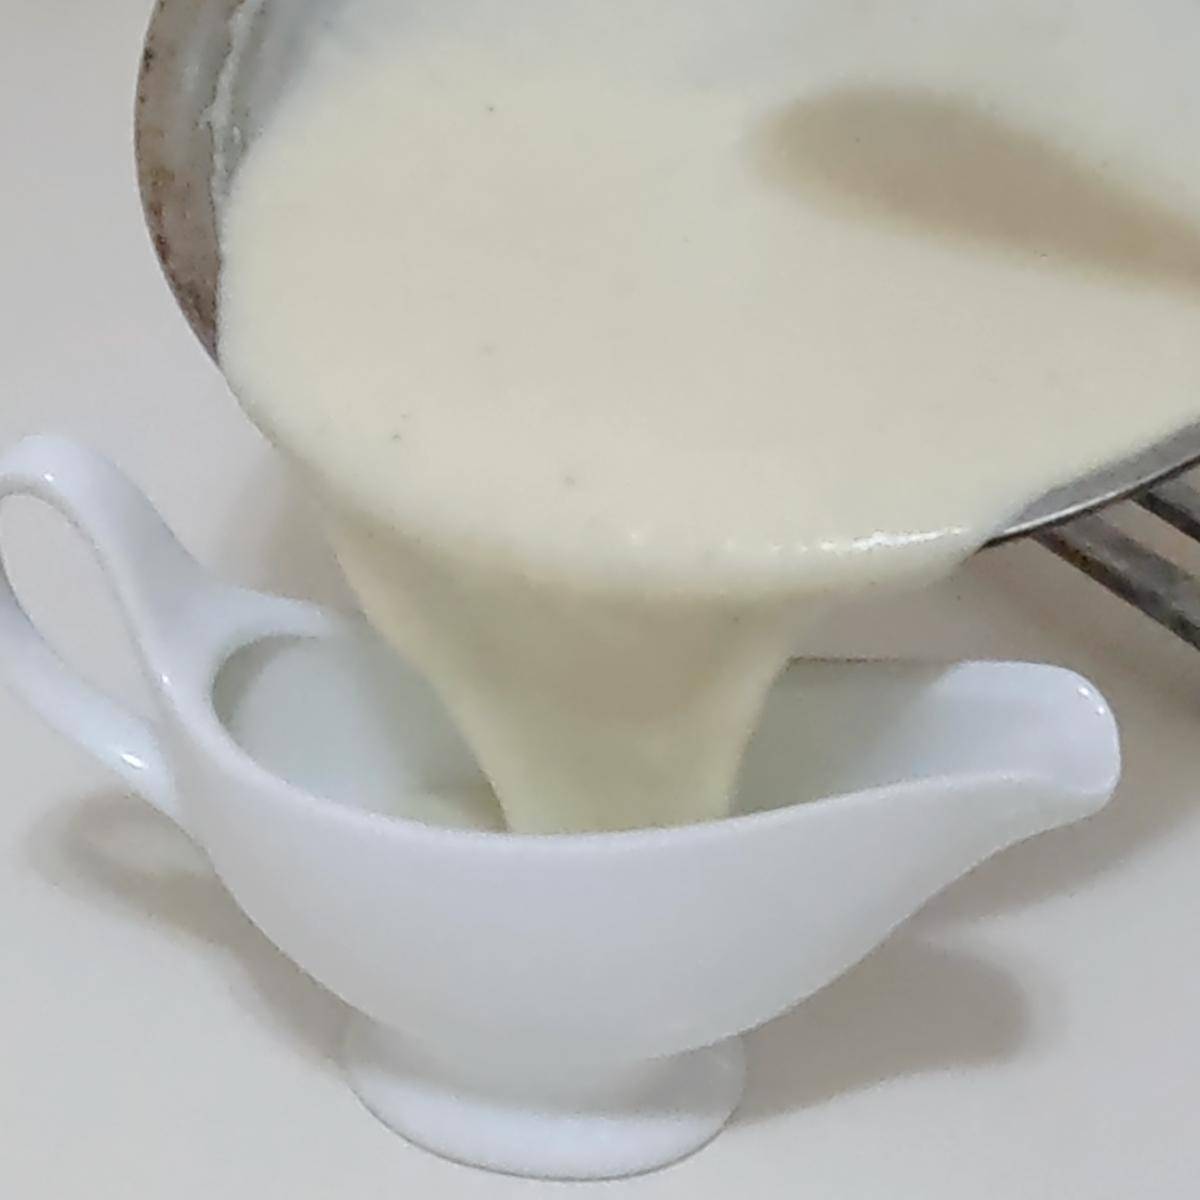 A sauce boat and saucepan with white sauce.